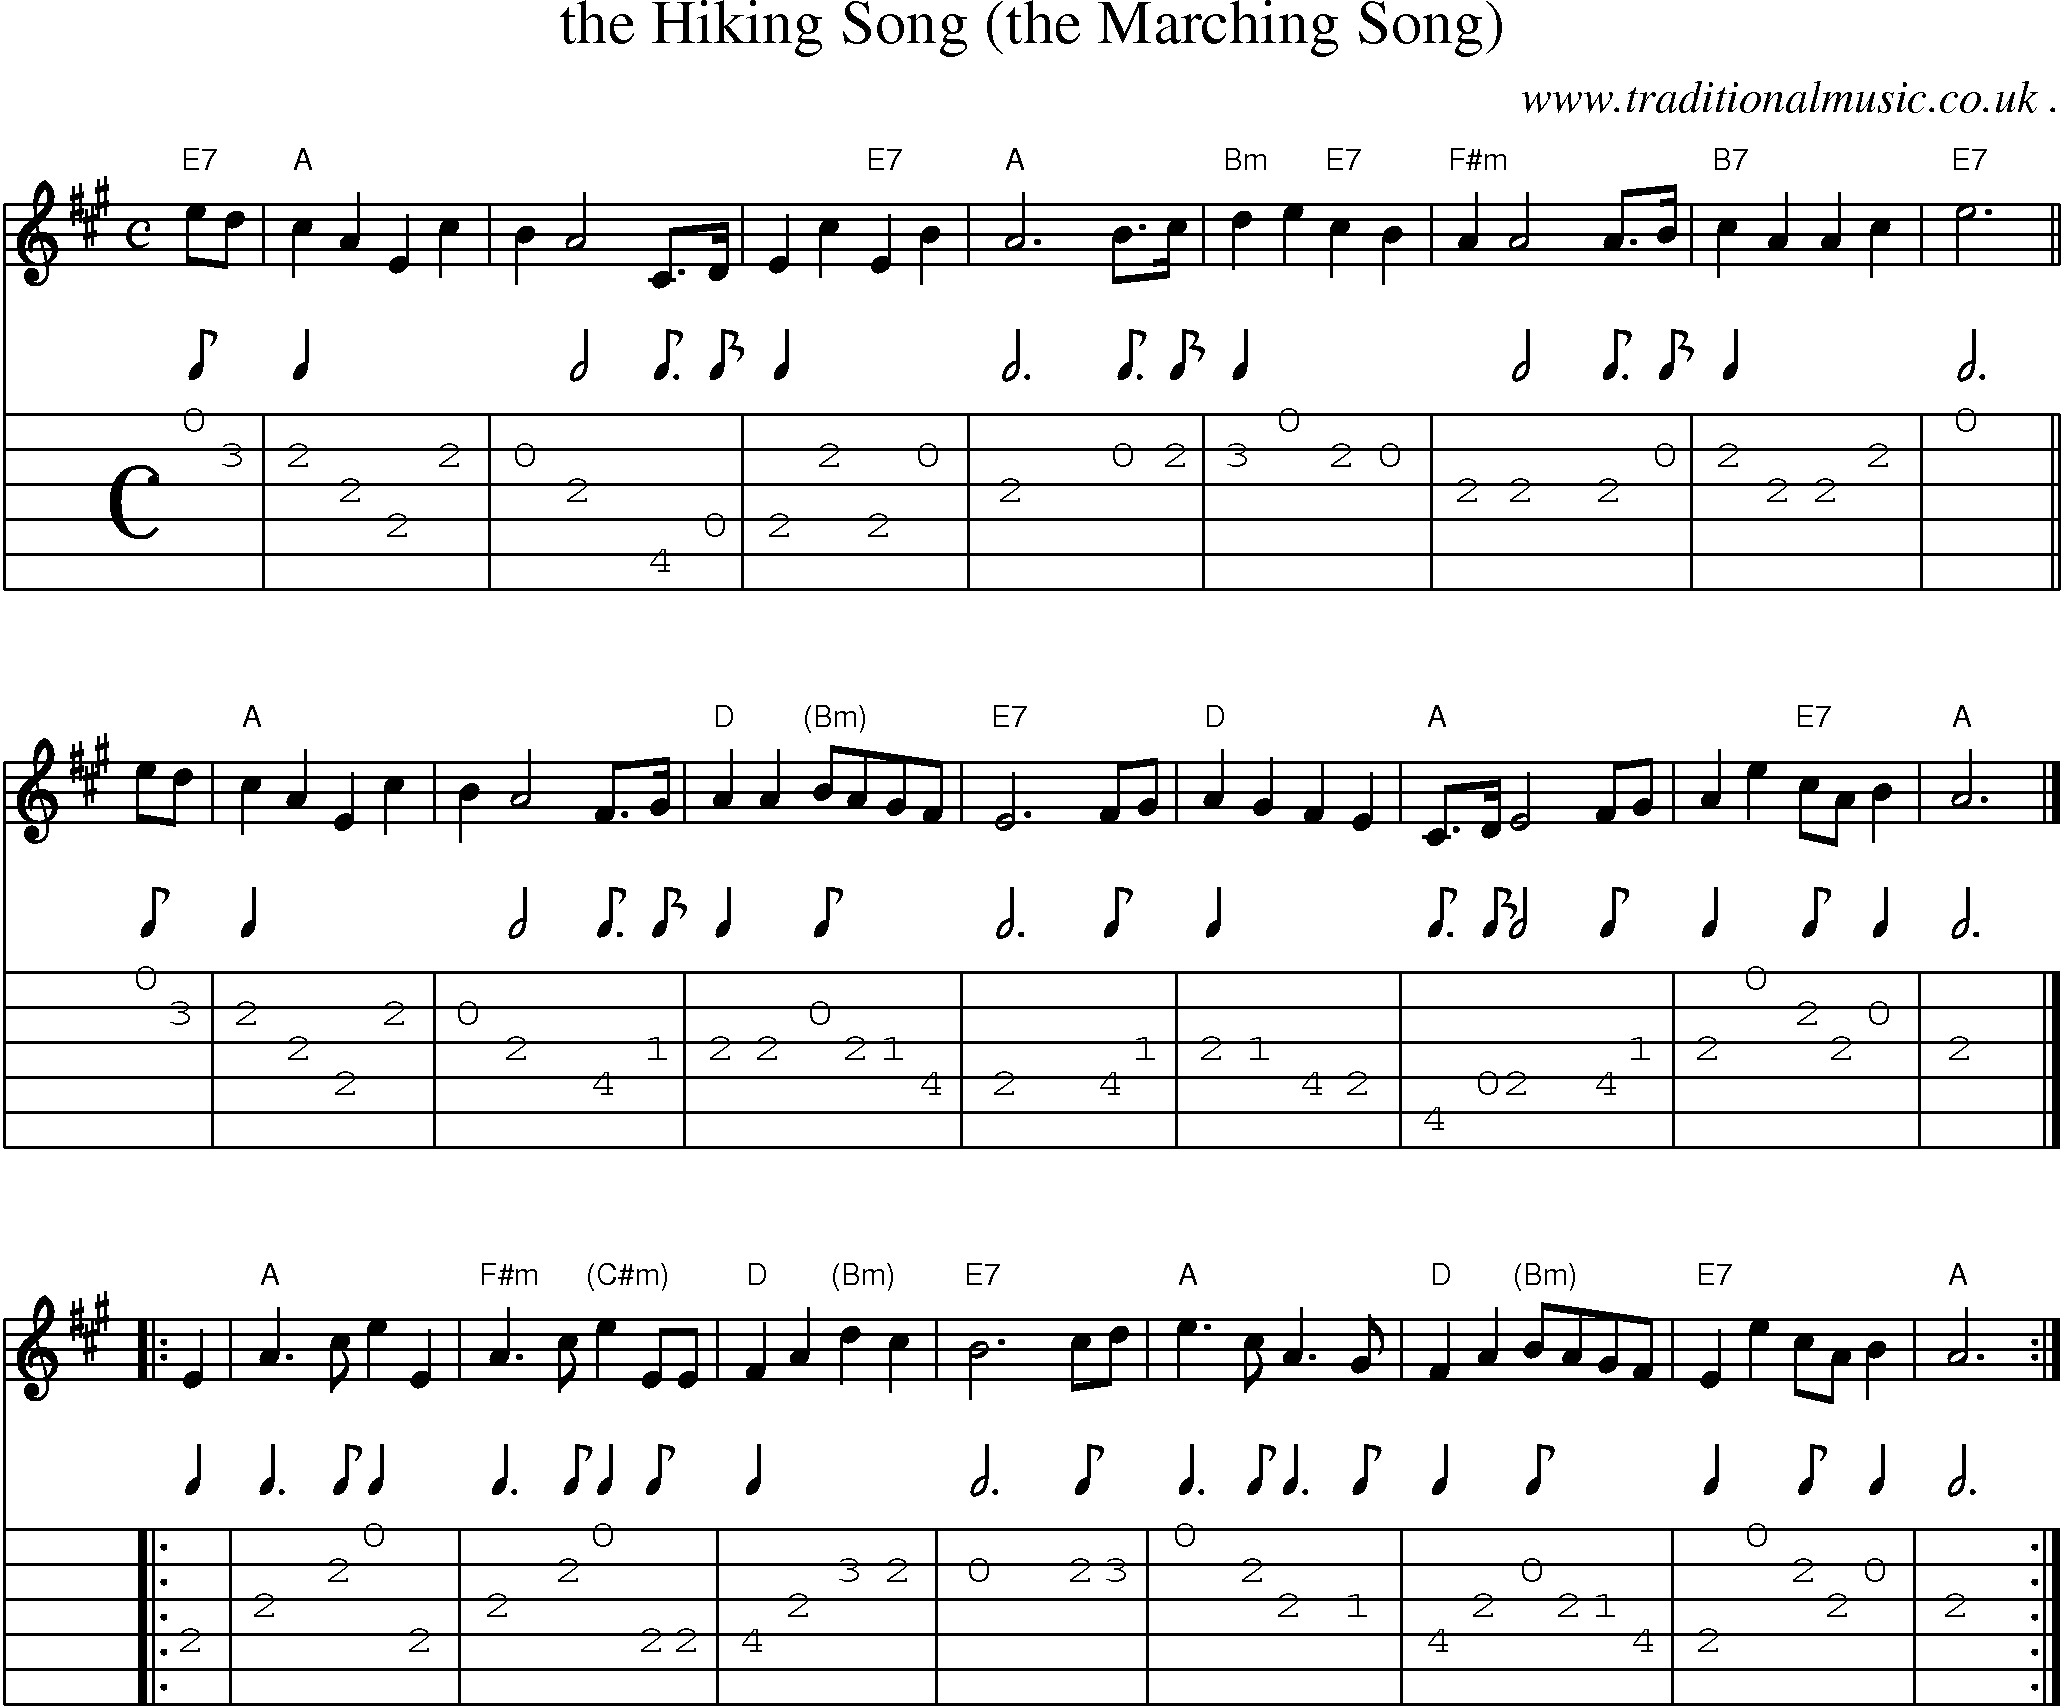 Sheet-music  score, Chords and Guitar Tabs for The Hiking Song The Marching Song